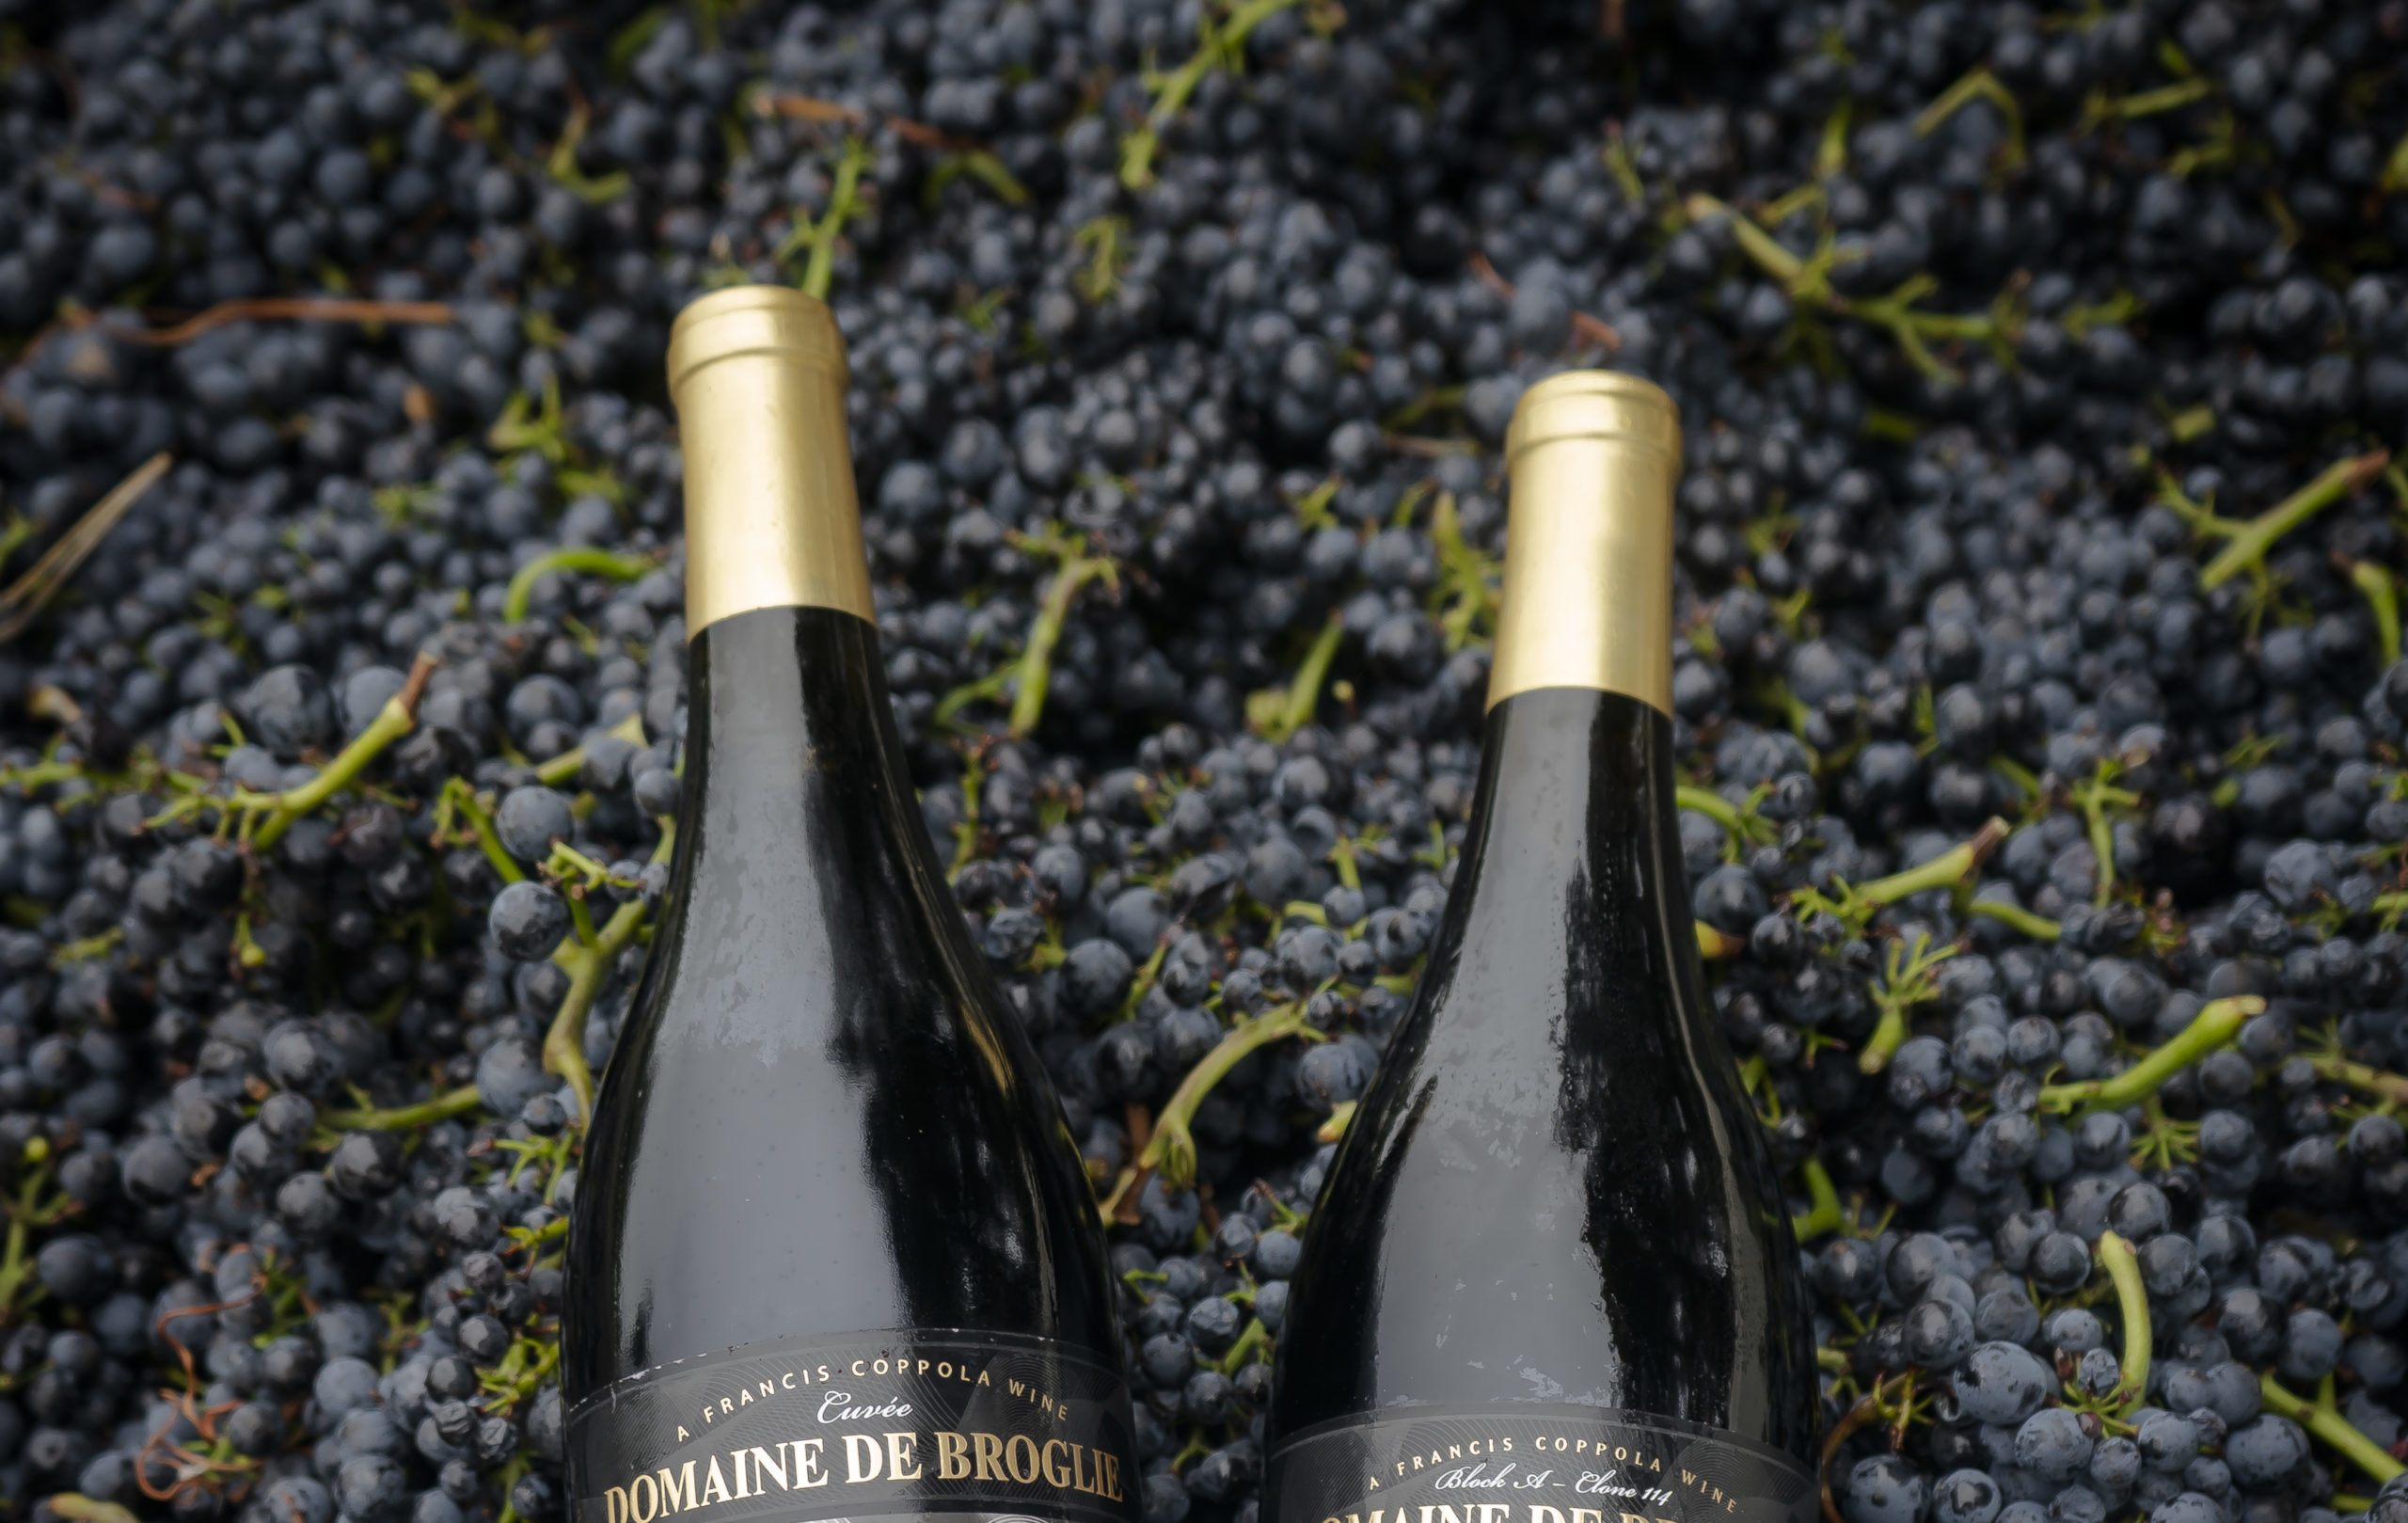 Two bottles of Domaine de Broglie wine sitting on top of a pile of grapes.